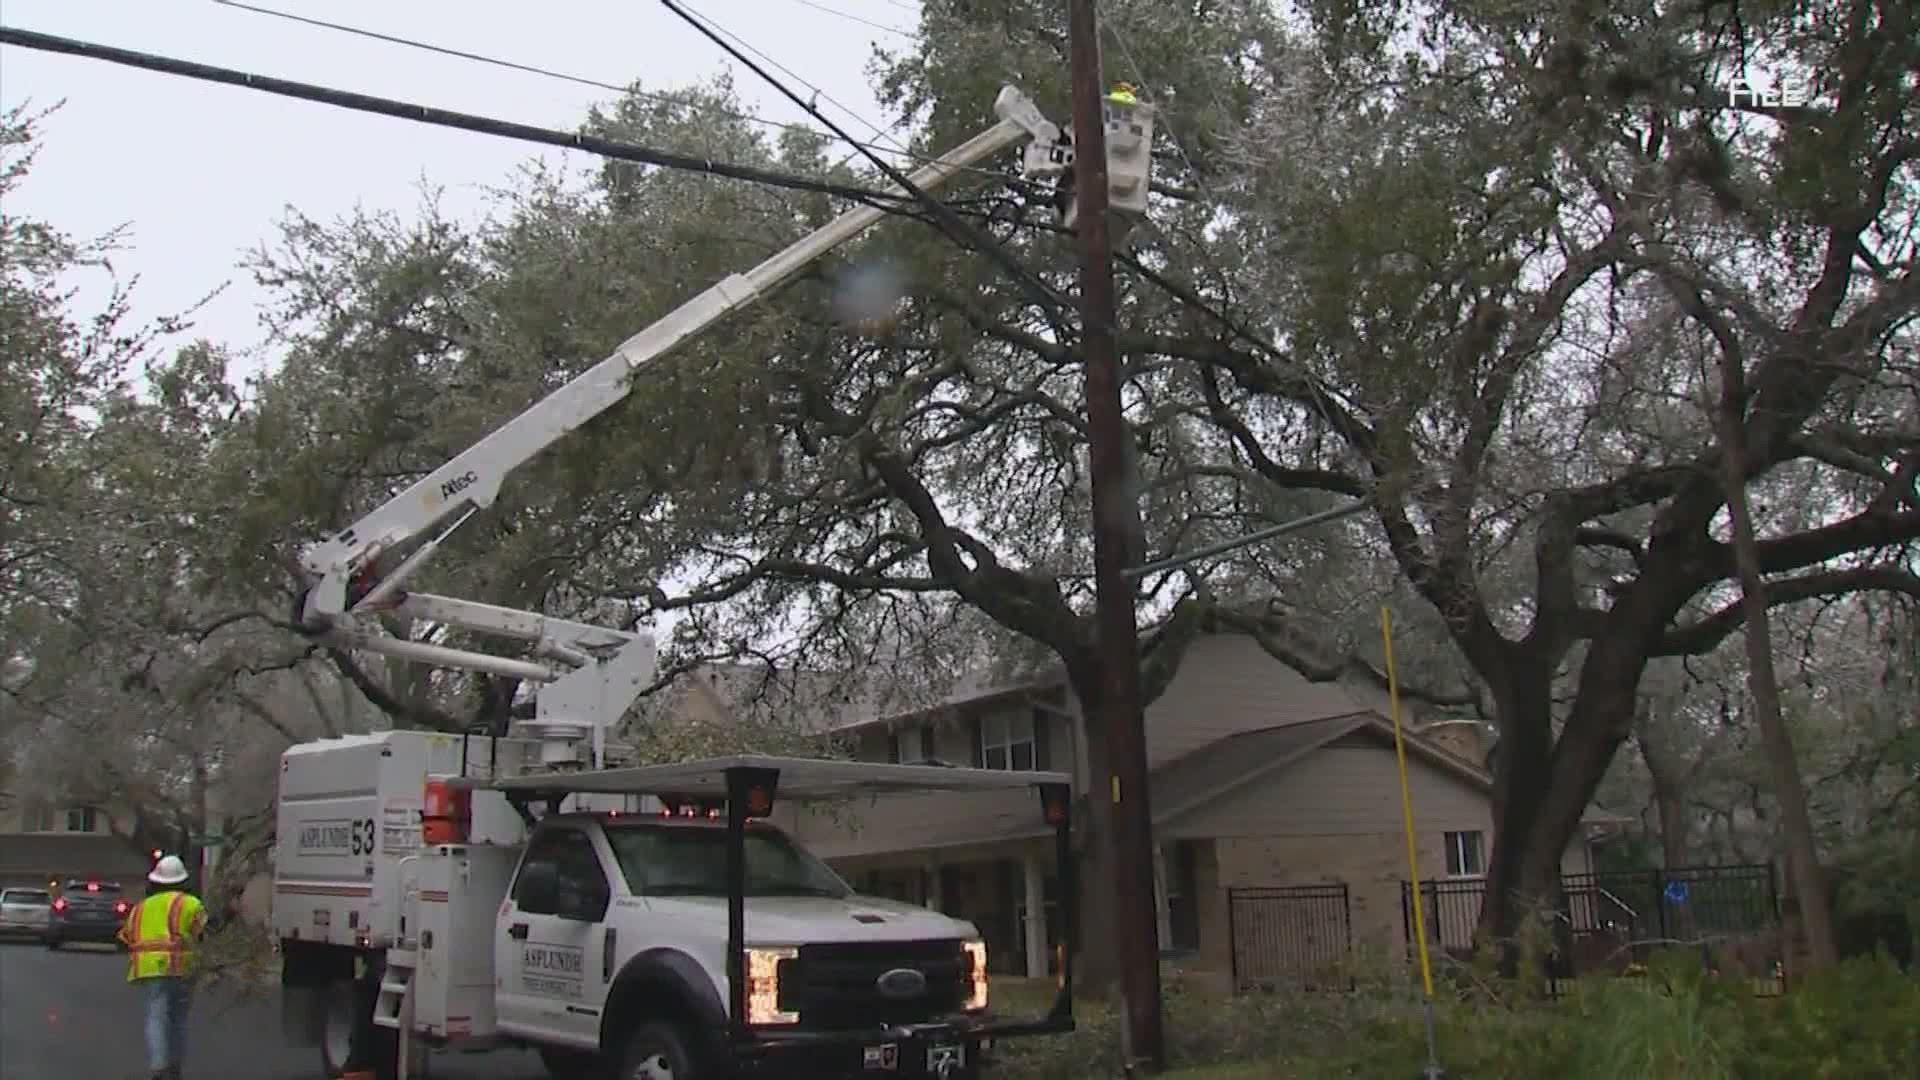 Local officials warned residents that the power may cut out as freezing temperatures hit the Houston area.